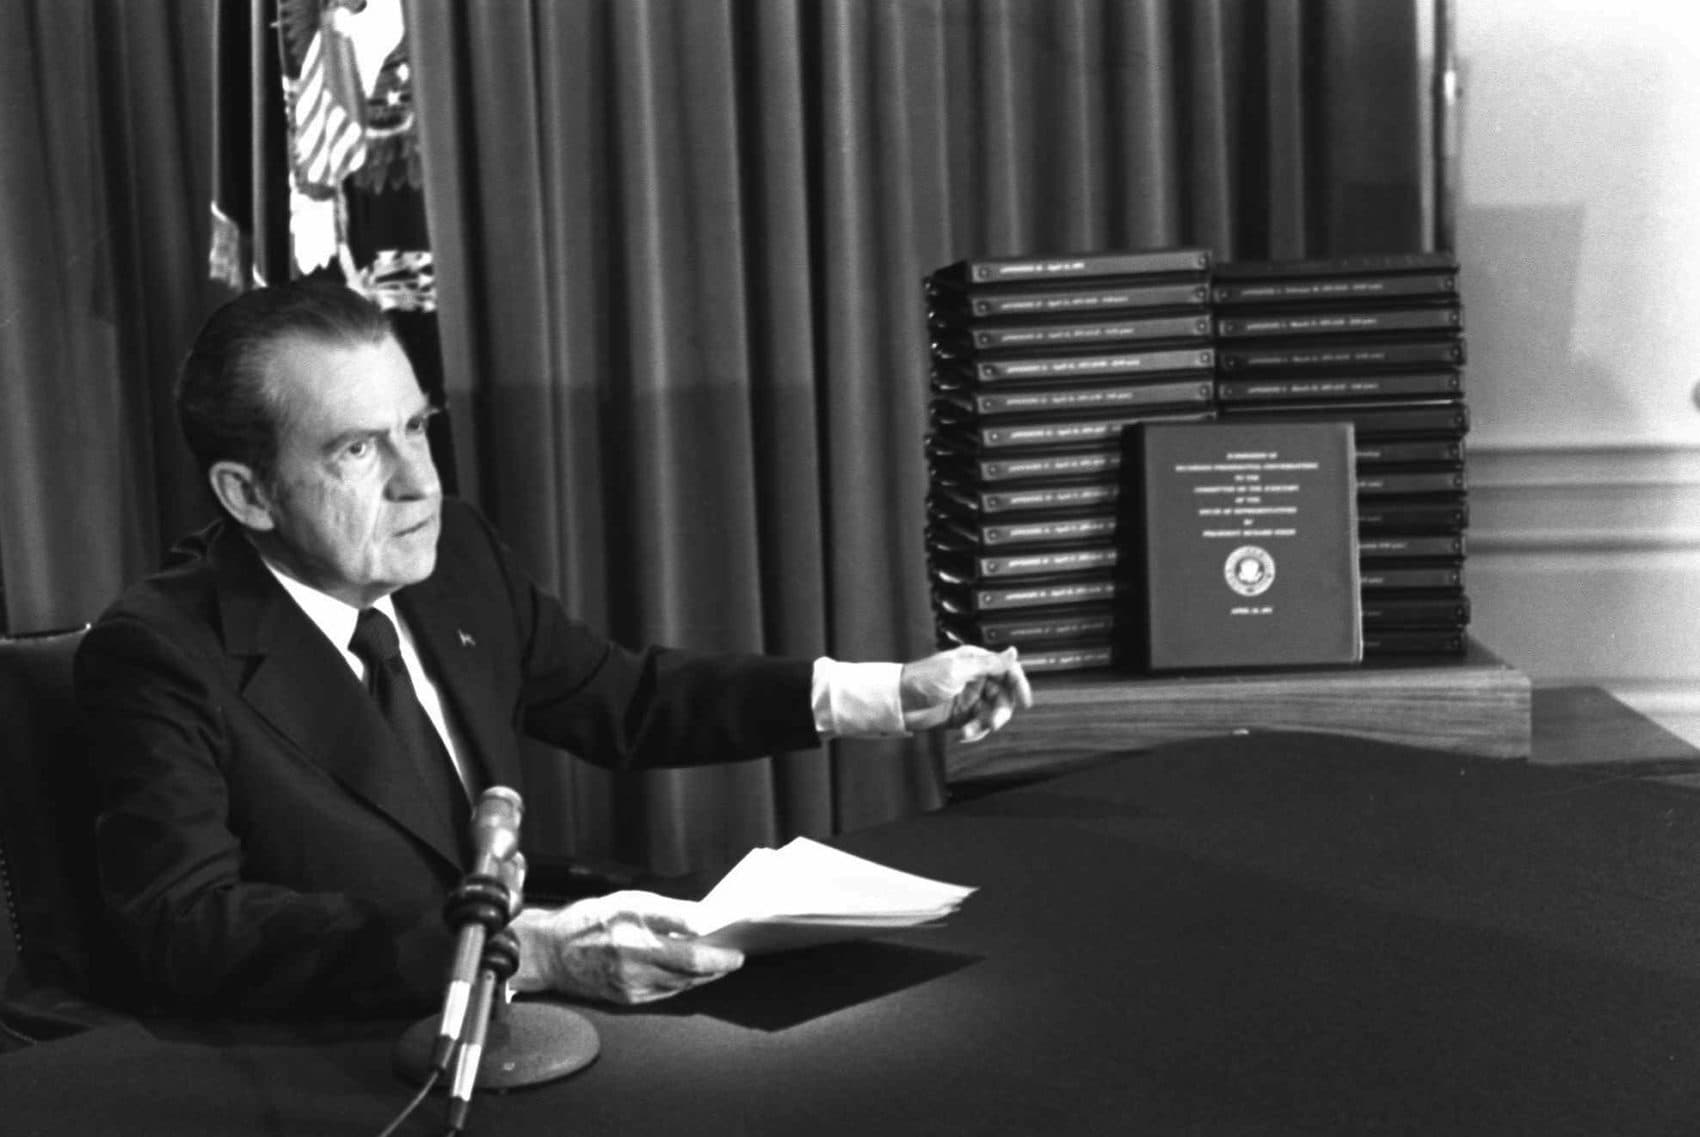 President Nixon gestures toward transcripts of White House tapes after announcing he would turn them over to House impeachment investigators and make them public in April 1974. (AP Photo)